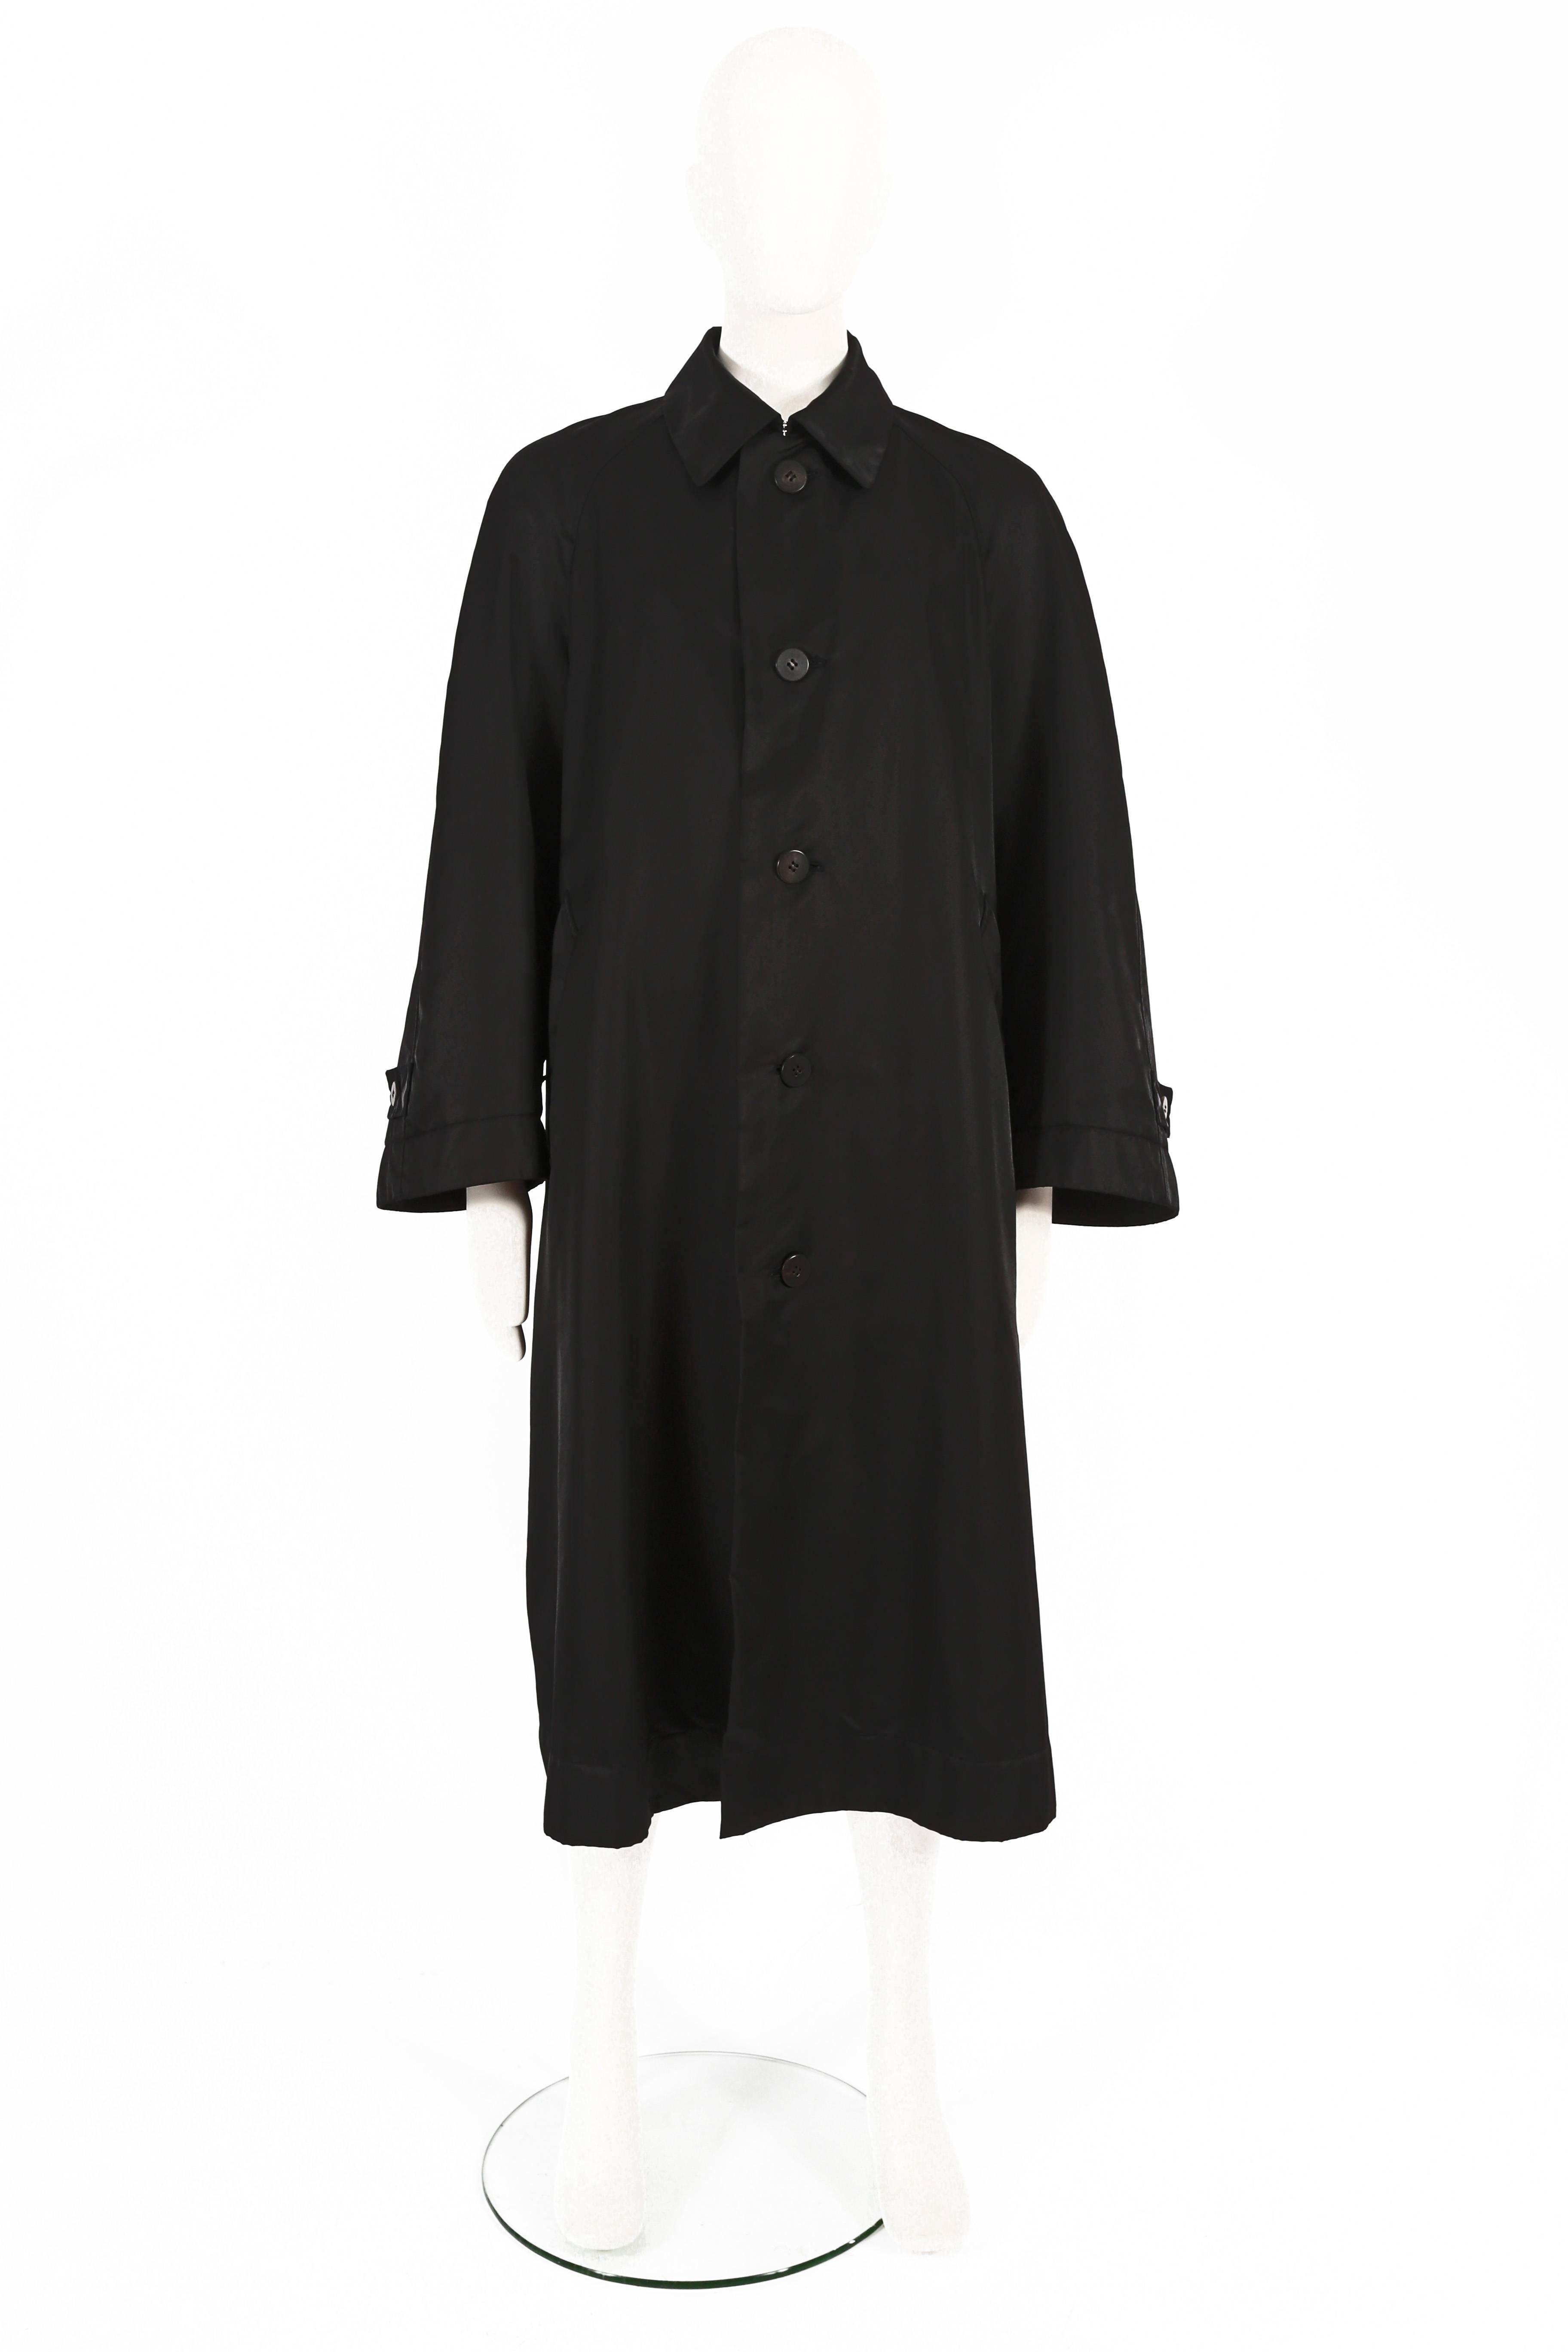 Introducing an Issey Miyake Men's oversized black nylon coat, a timeless and versatile piece from the 1990s. This coat showcases Issey Miyake's signature design aesthetic and commitment to both style and functionality.

The coat features a classic